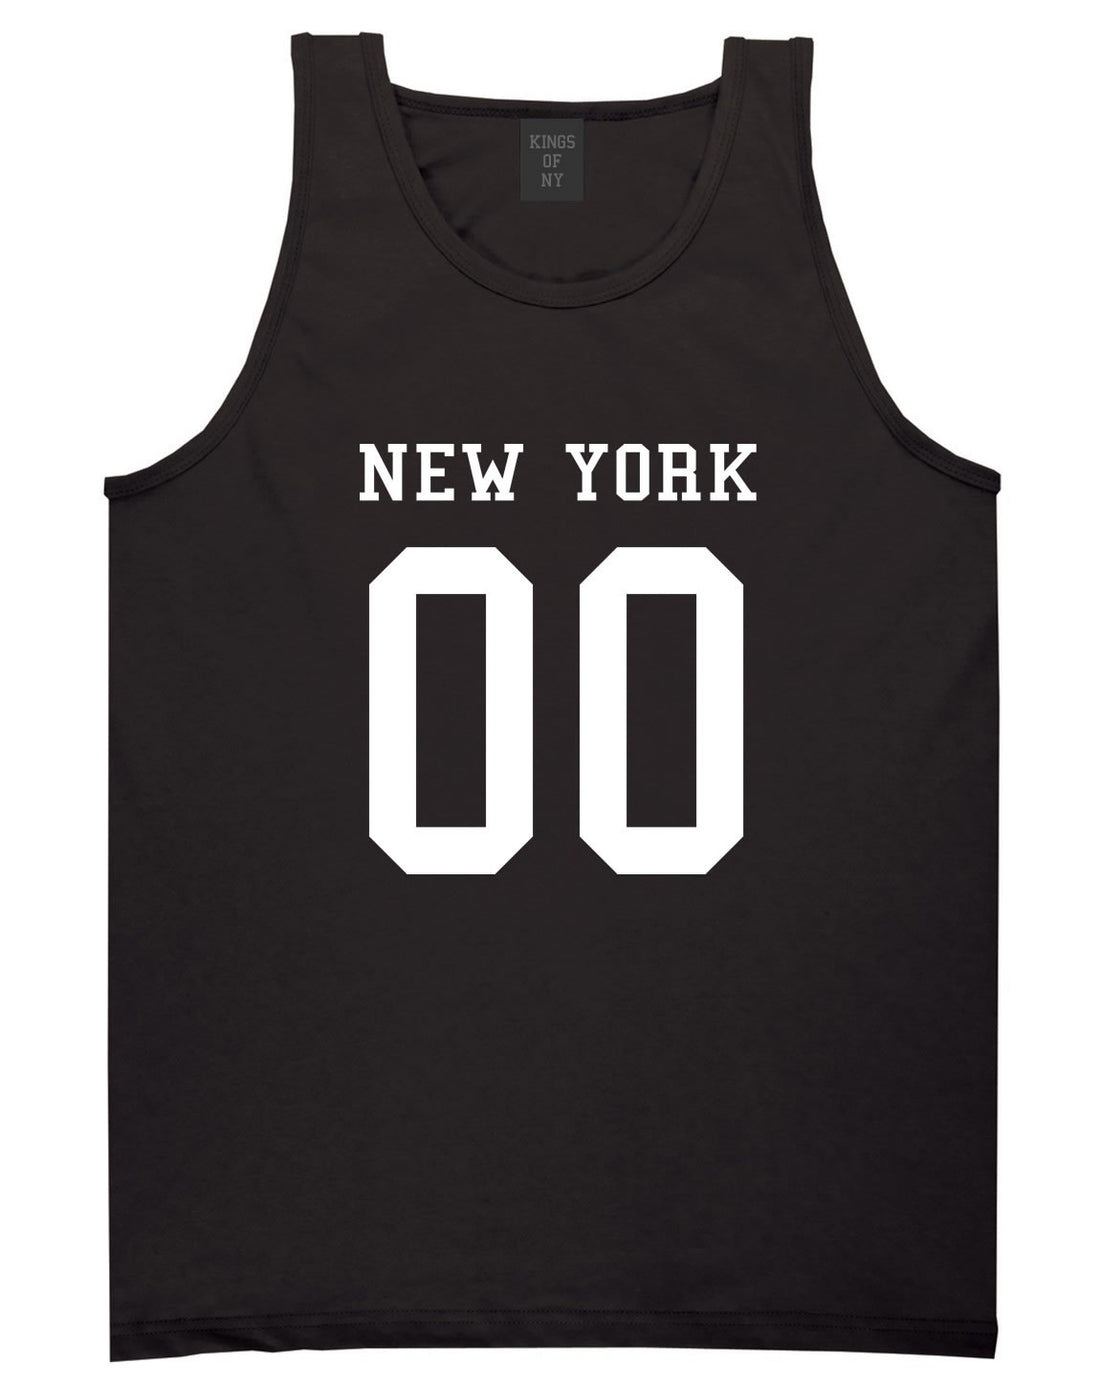 New York Team 00 Jersey Tank Top in Black By Kings Of NY